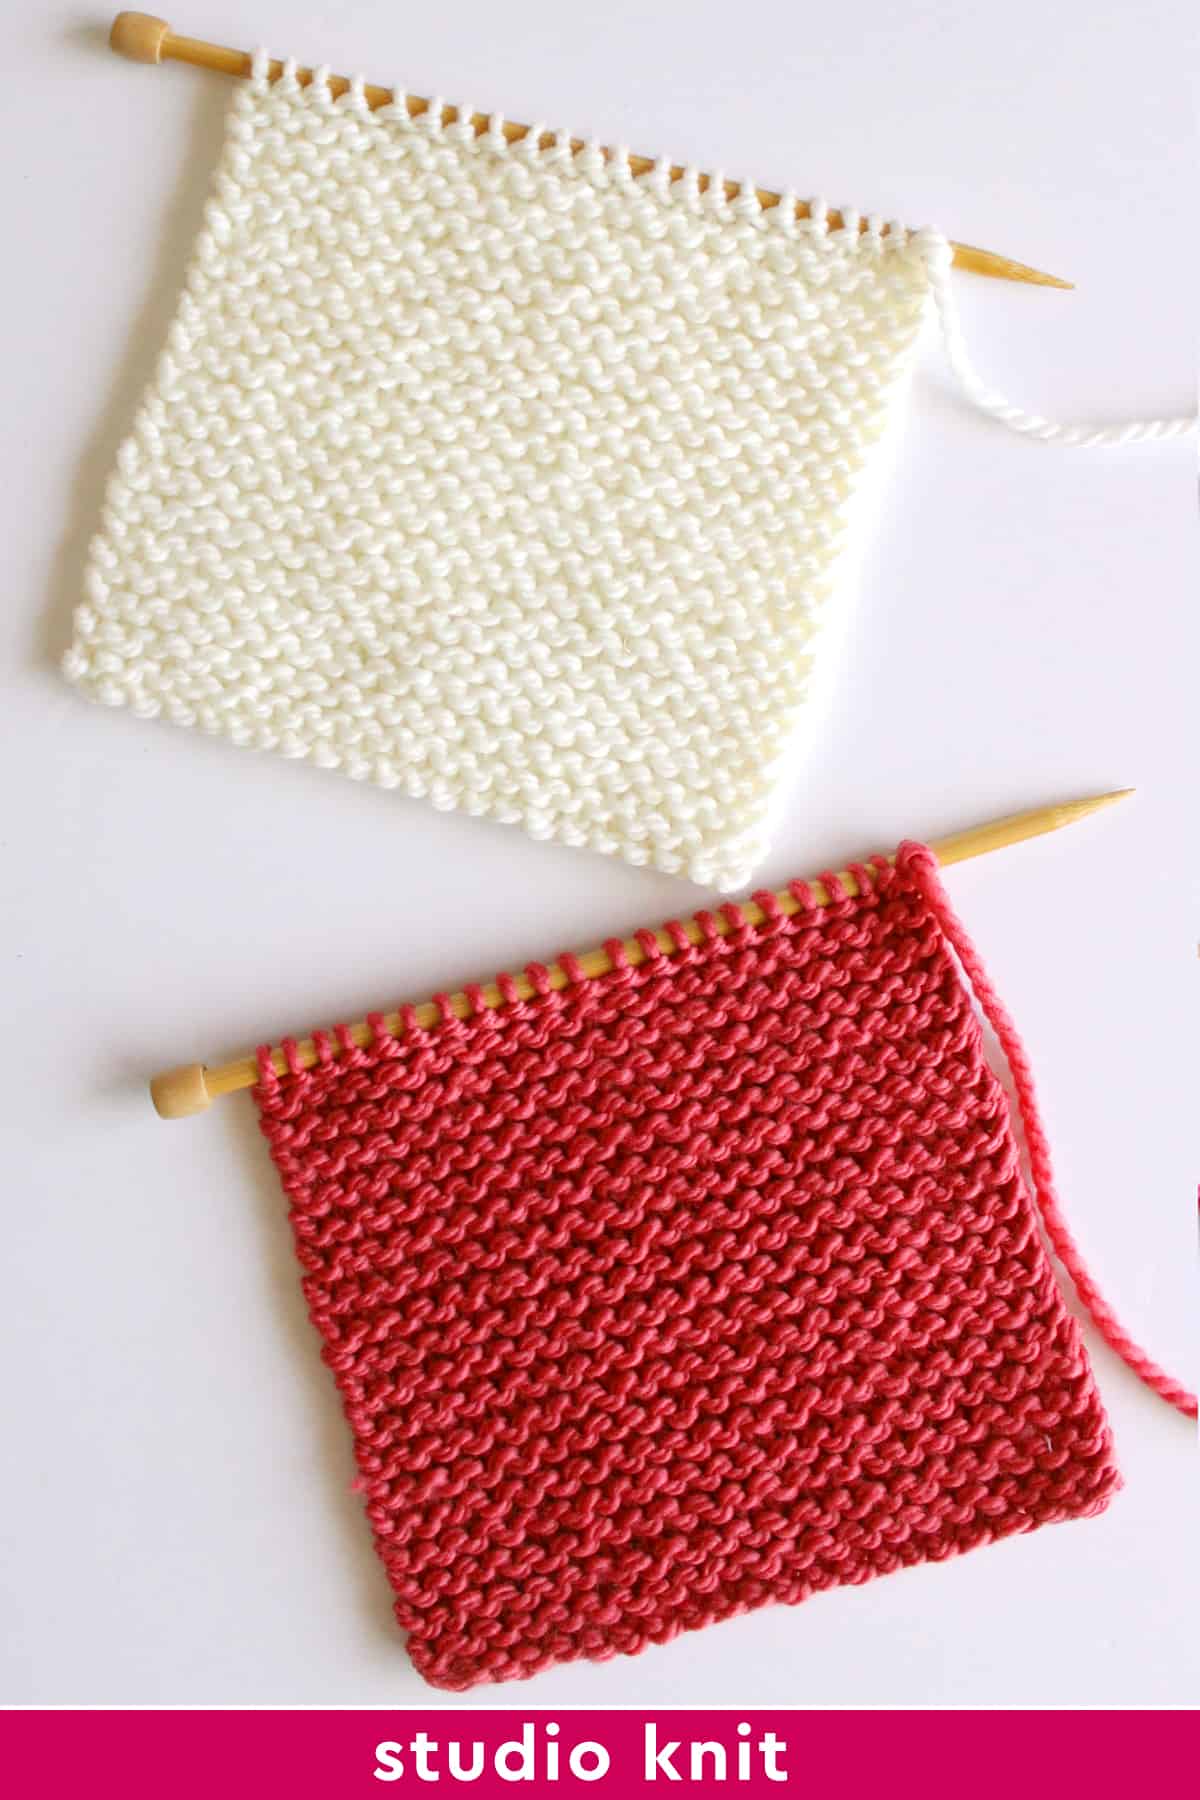 Two garter stitch knitting swatches in white and pink color yarn.